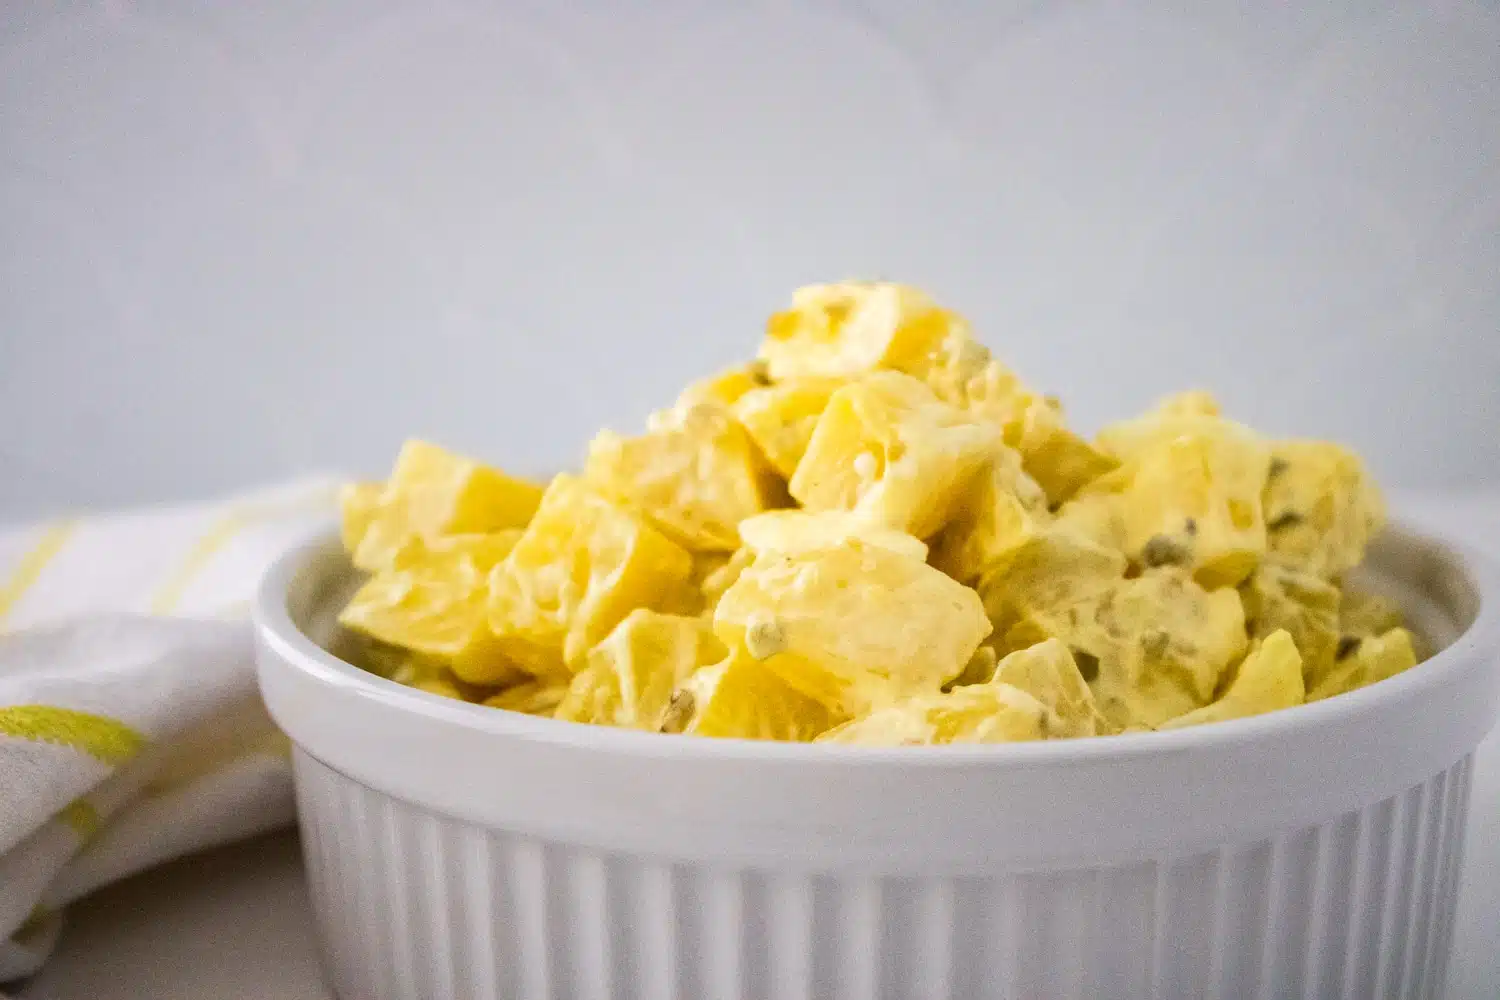 Southern Potato Salad in a white serving bowl, white and yellow checkered kitchen towel.